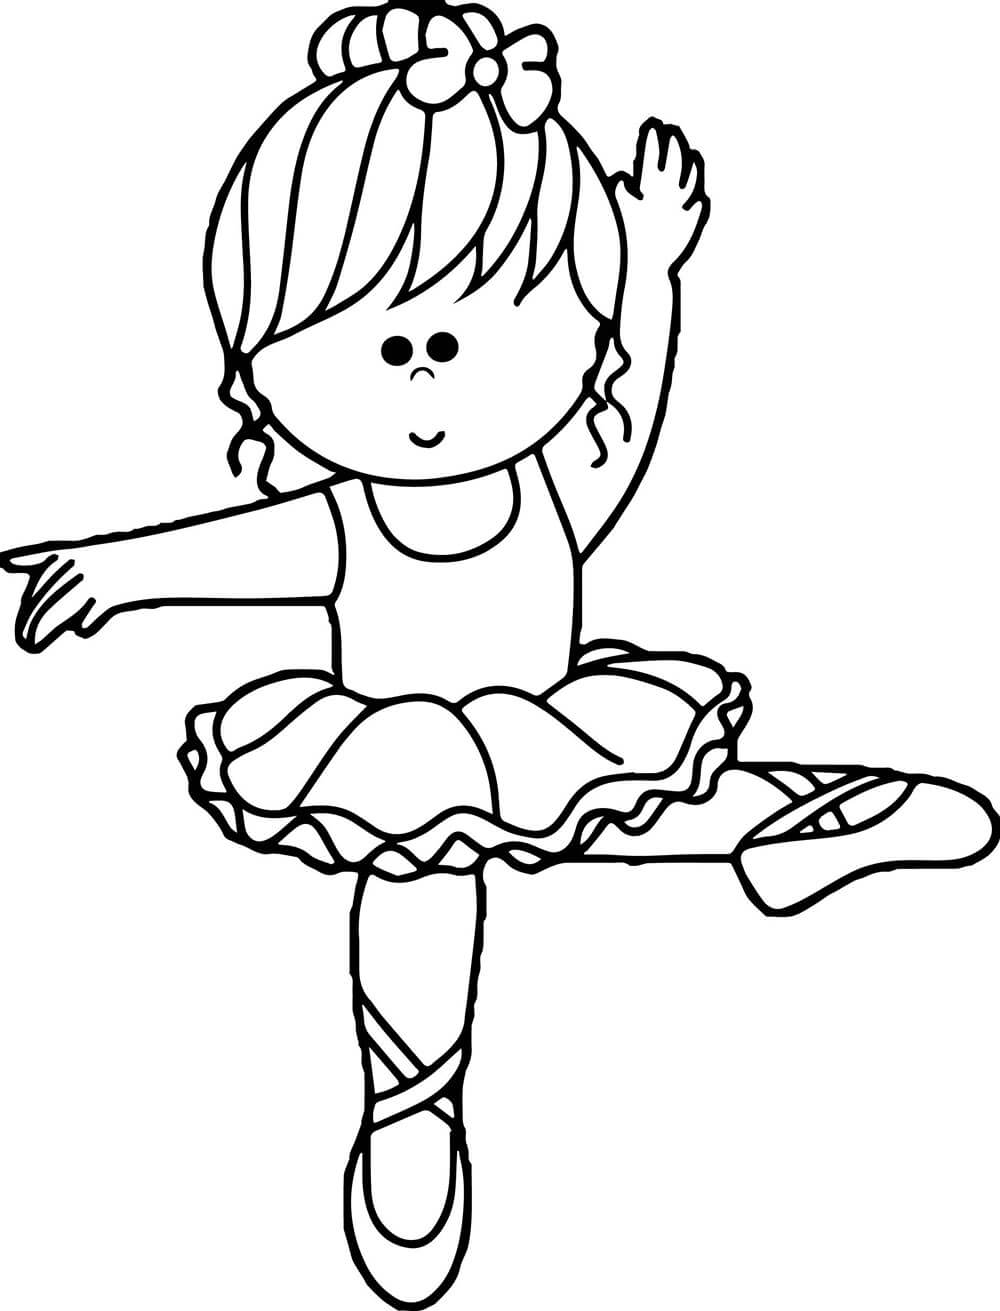 Lovely Ballerina Coloring Page Free Printable Coloring Pages for Kids